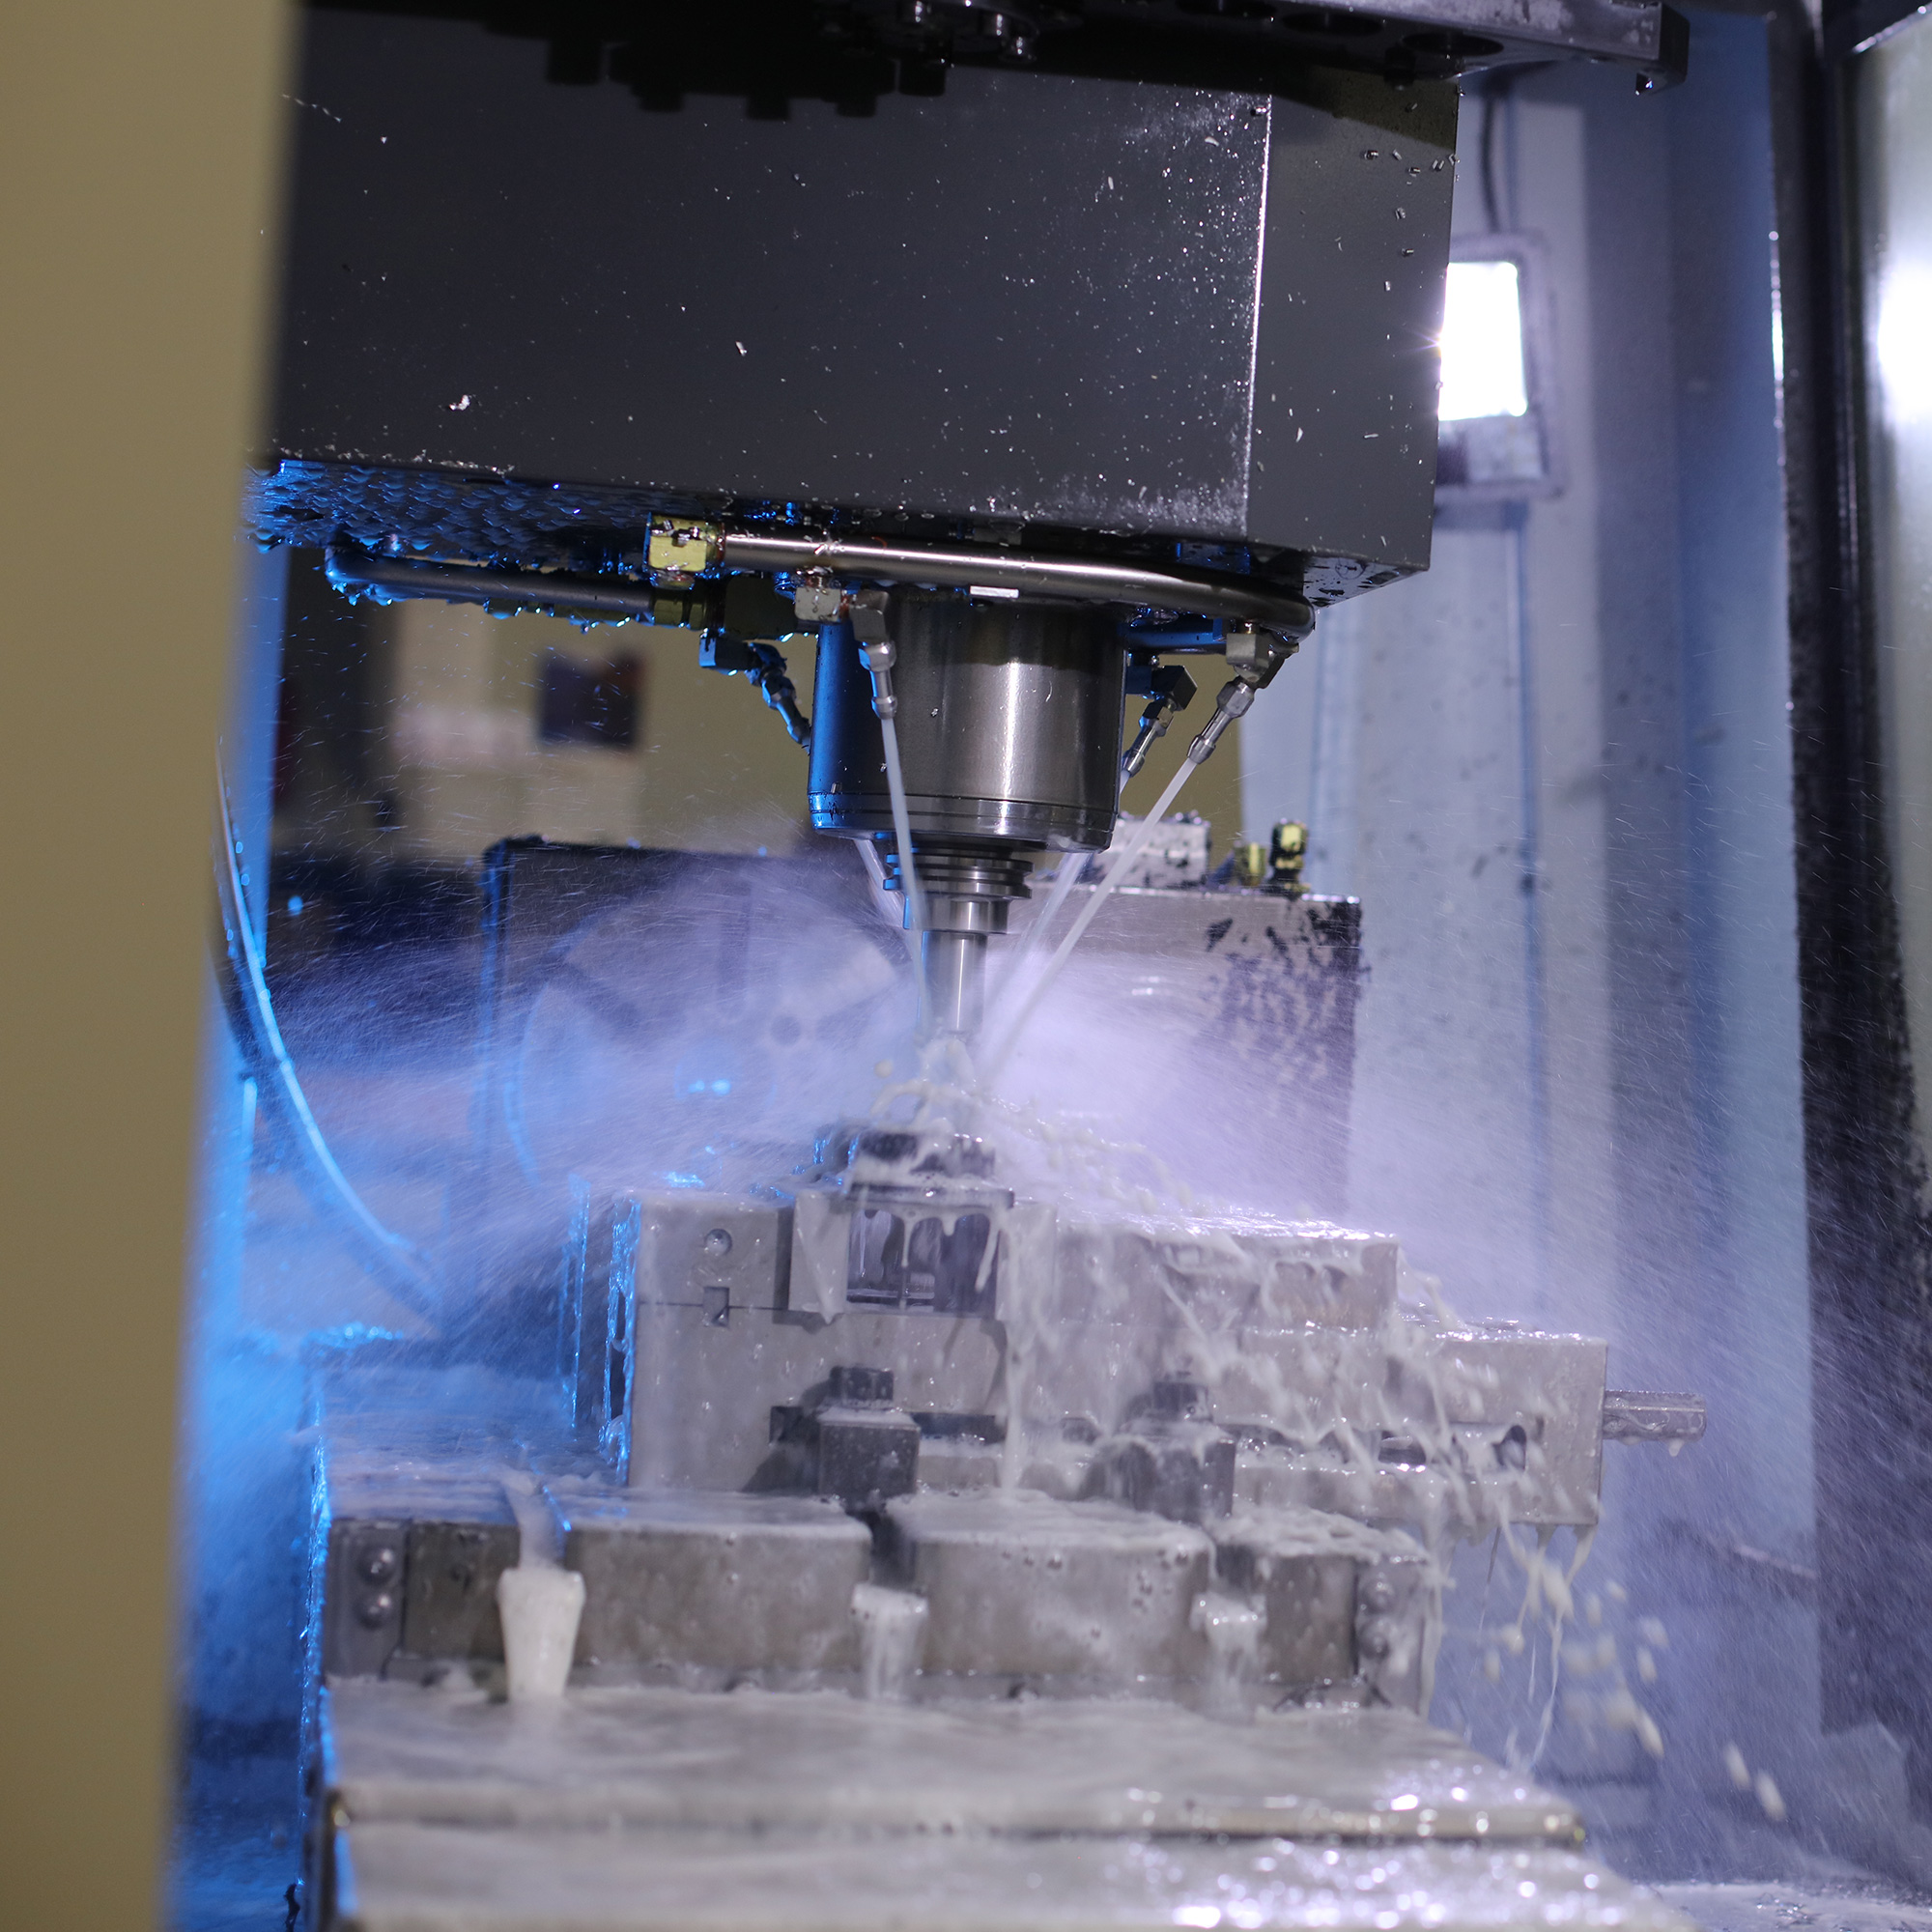 inside view of a water jet machining centre